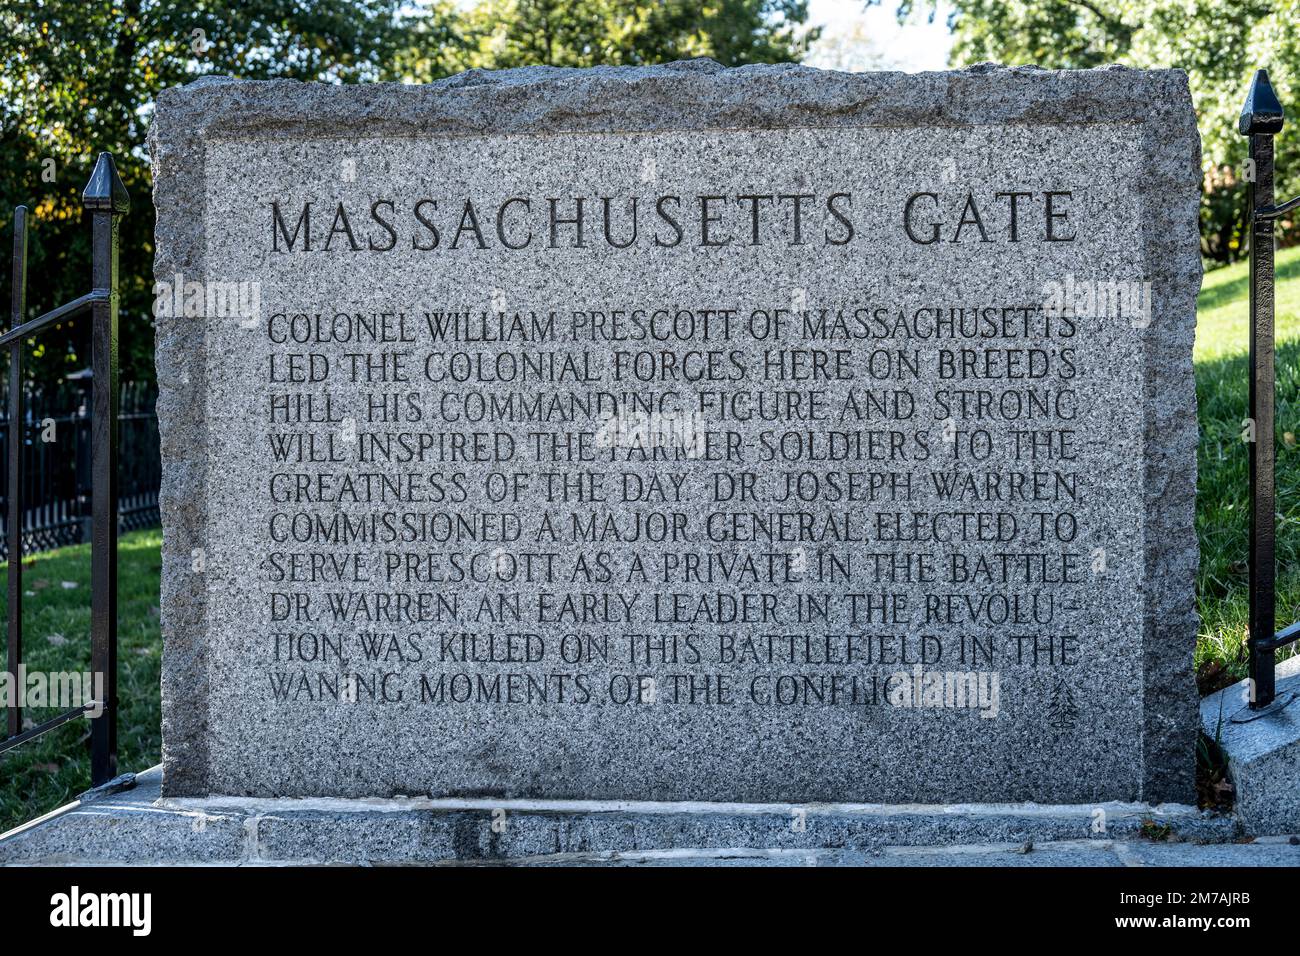 granite sign showing the location of the Massachusetts Gate and description of the battle on Breed's Hill on June 17, 1775 Stock Photo